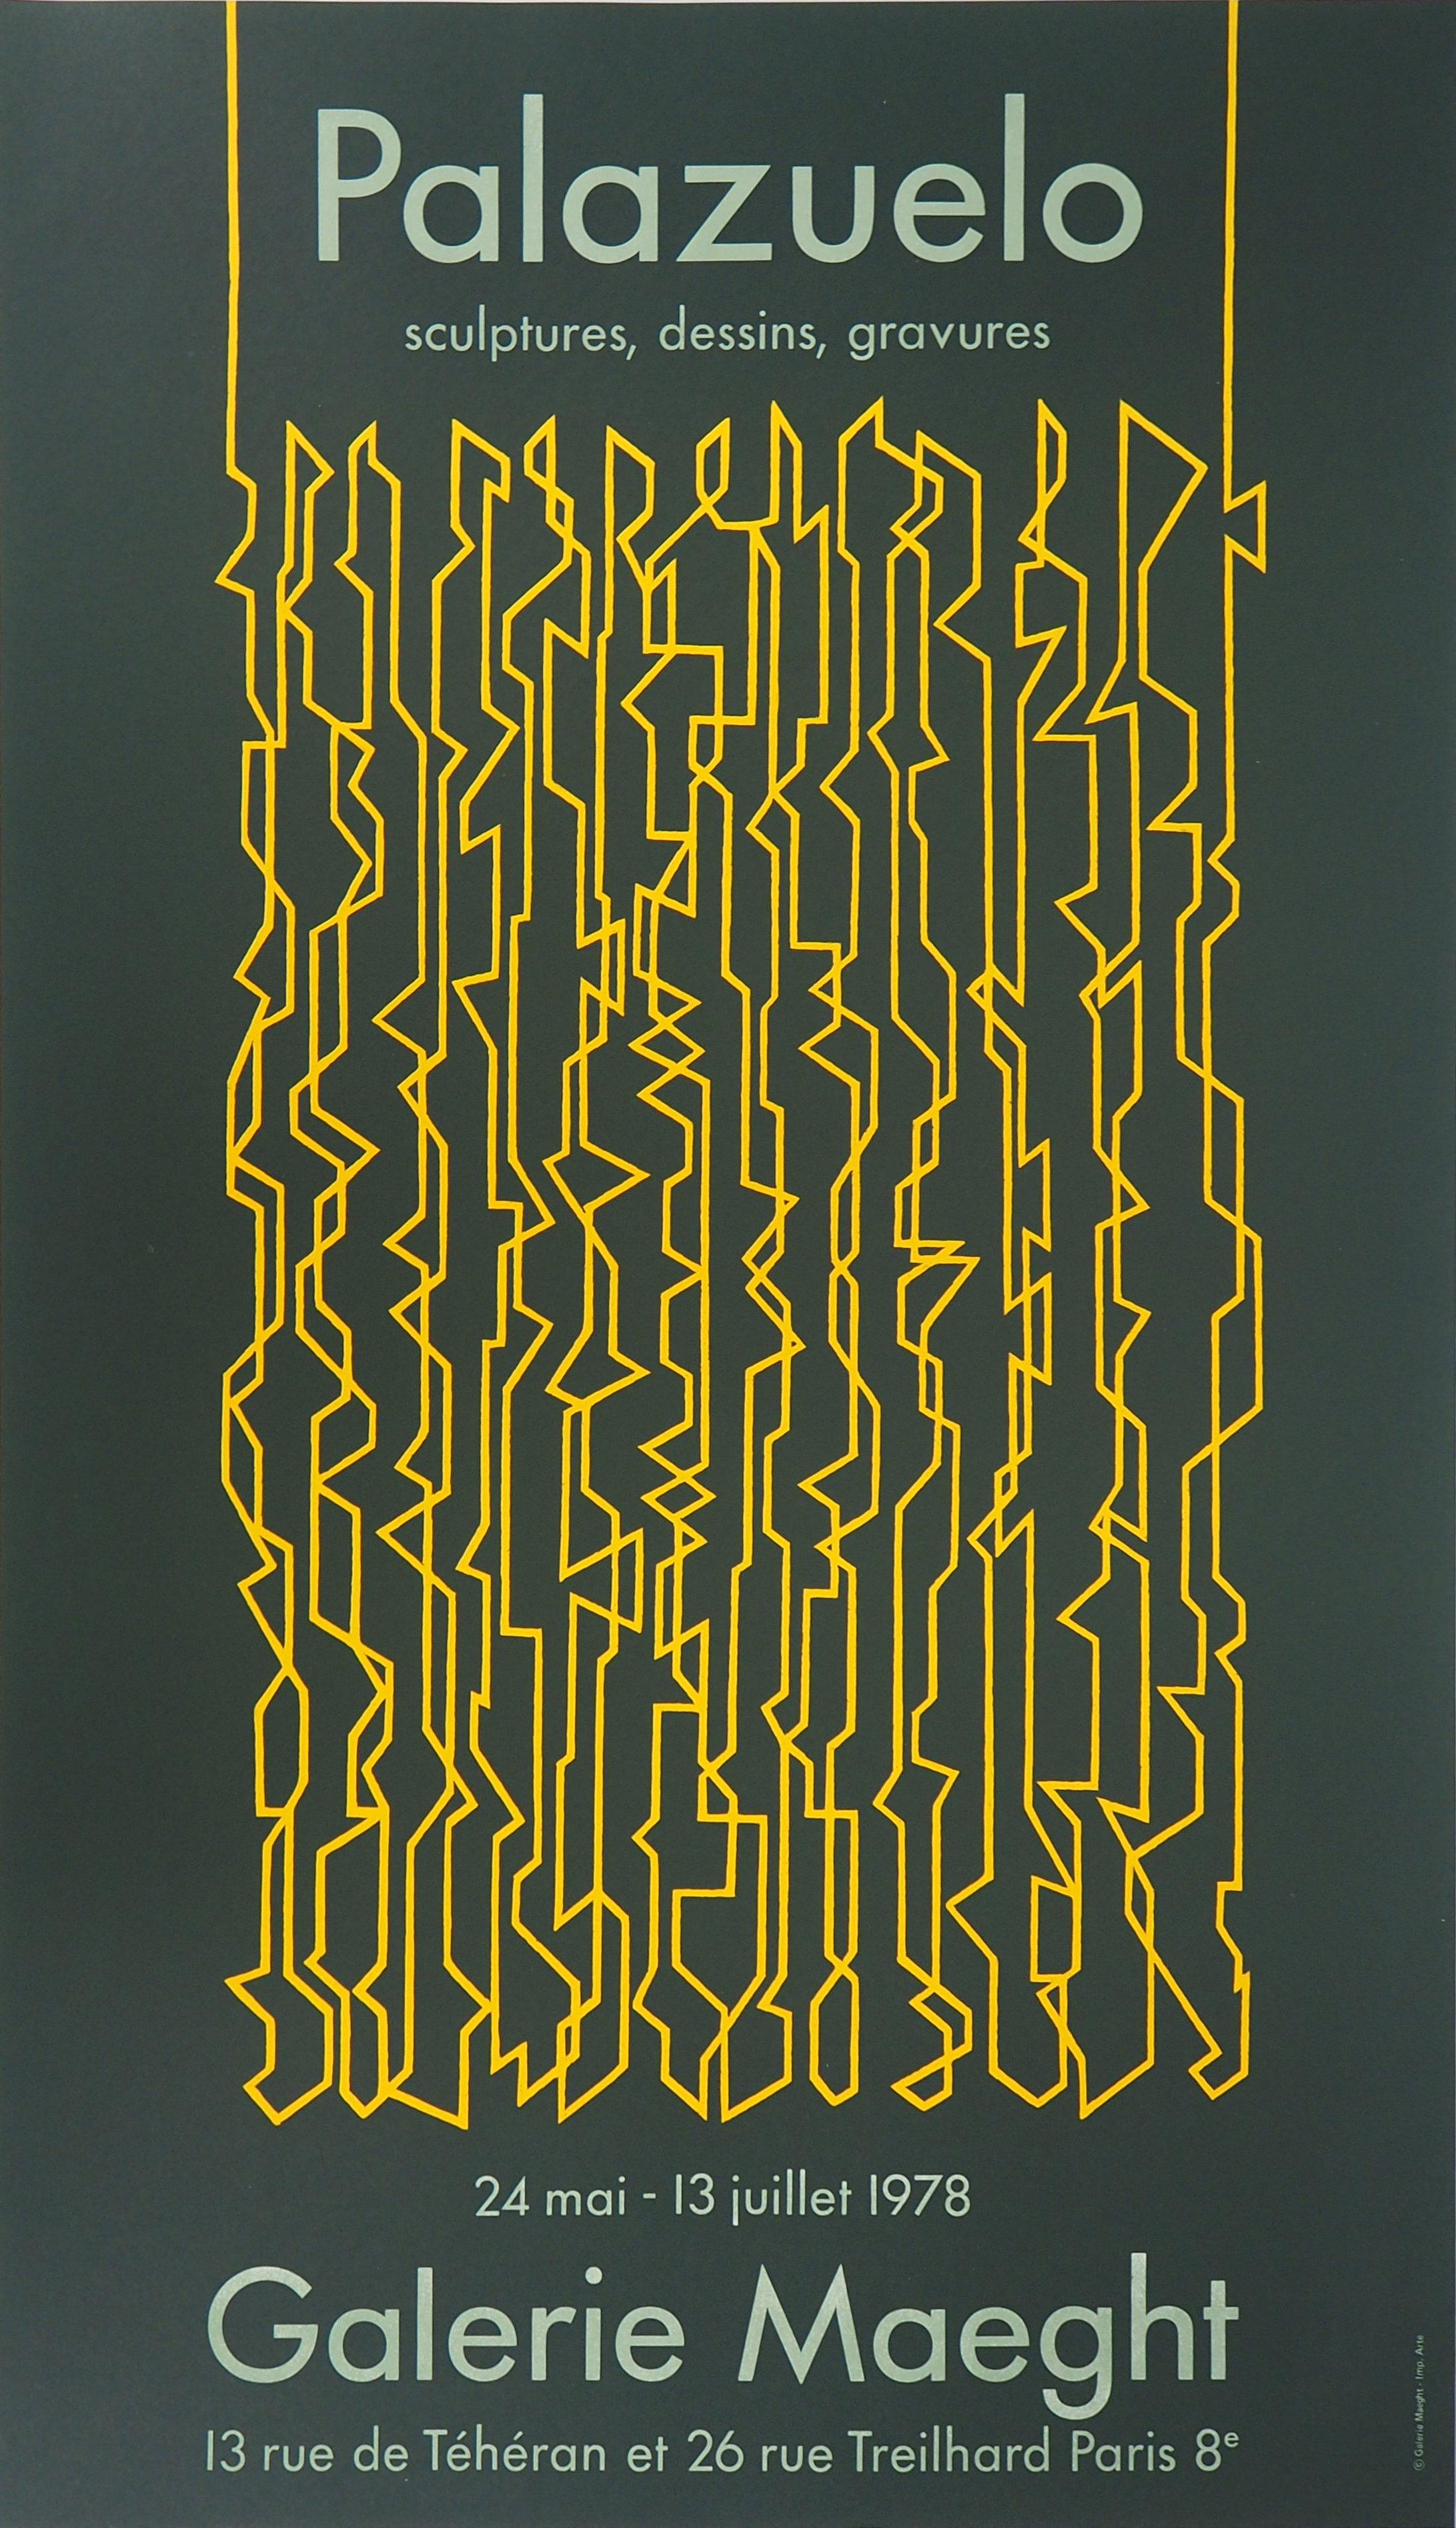 Pablo Palazuelo Abstract Print - Abstract : Geometric Lines - Original vintage lithograph poster - Maeght 1978